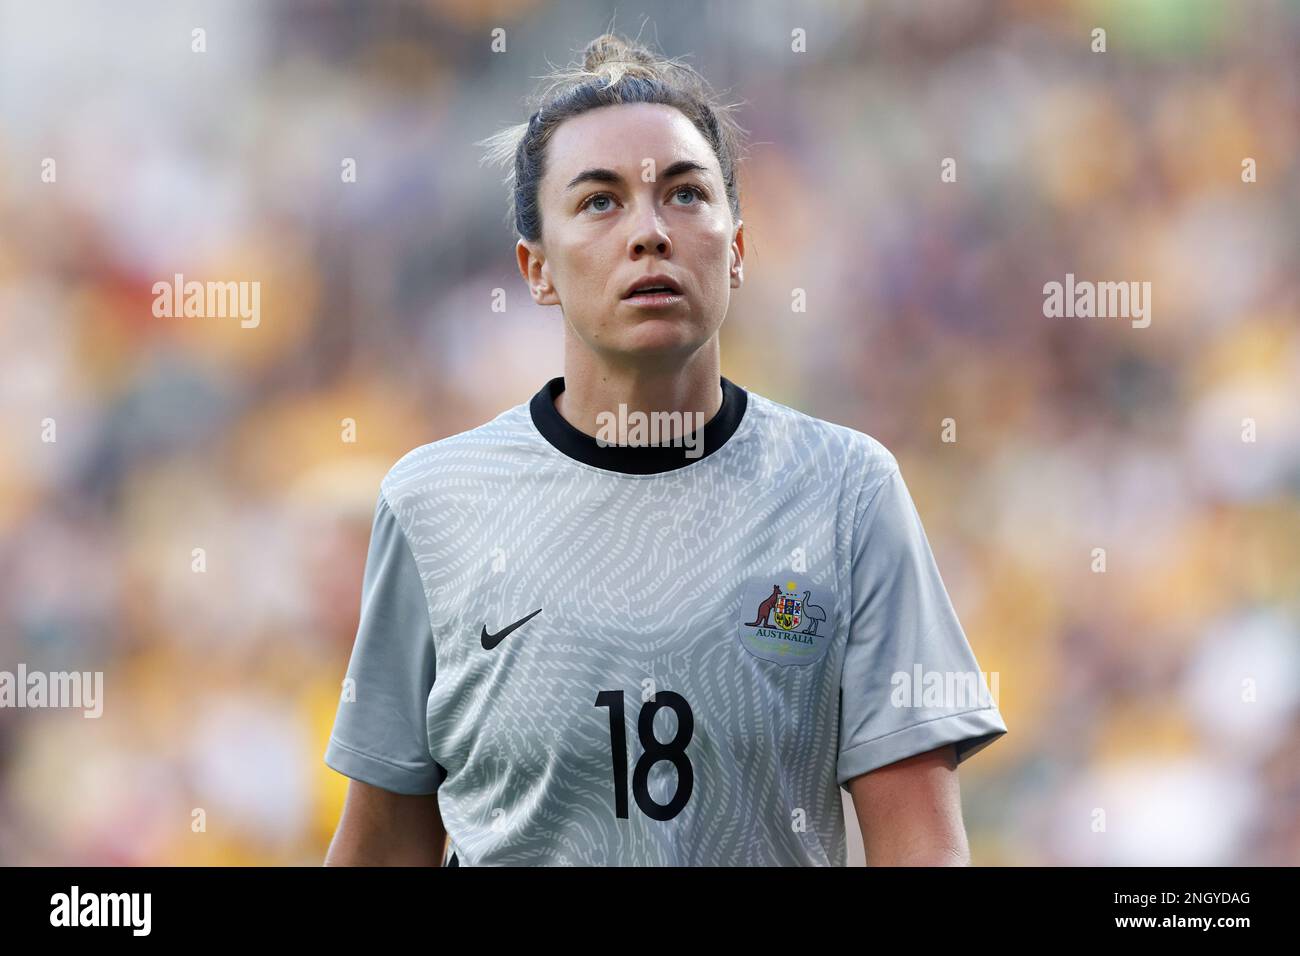 Sydney, Australia. 19th Feb, 2023. Mackenzie Arnold of Australia looks on during the 2023 Cup of Nations match between Australian Matildas and Spain at CommBank Stadium on February 19, 2023 in Sydney, Australia Credit: IOIO IMAGES/Alamy Live News Stock Photo